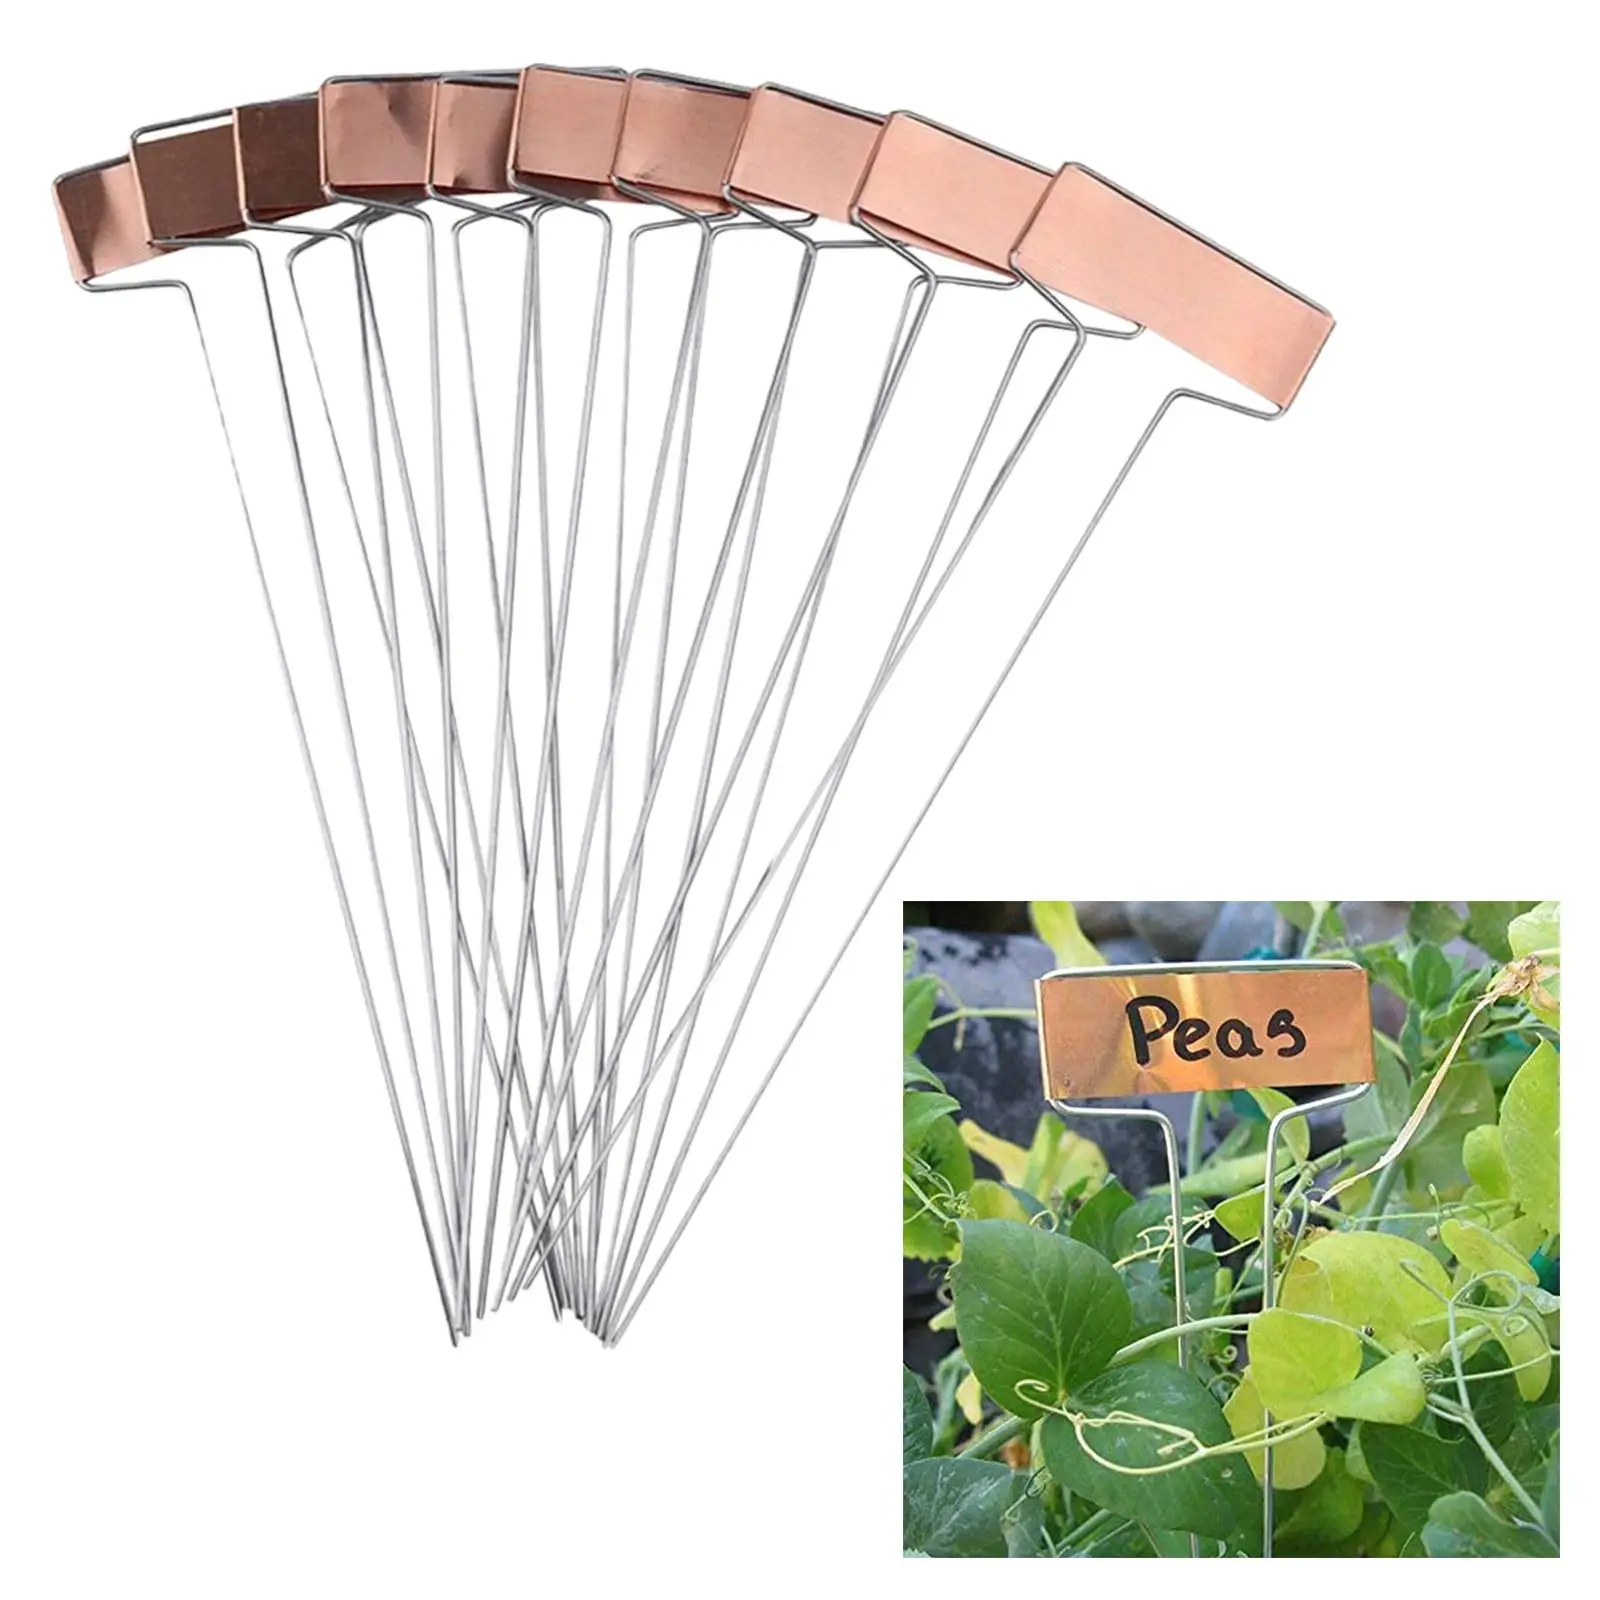 10 Pieces Metal Plant Labels Plant Container Accessories Weatherproof Reusable Plant Markers for Garden Home Balcony Outdoor